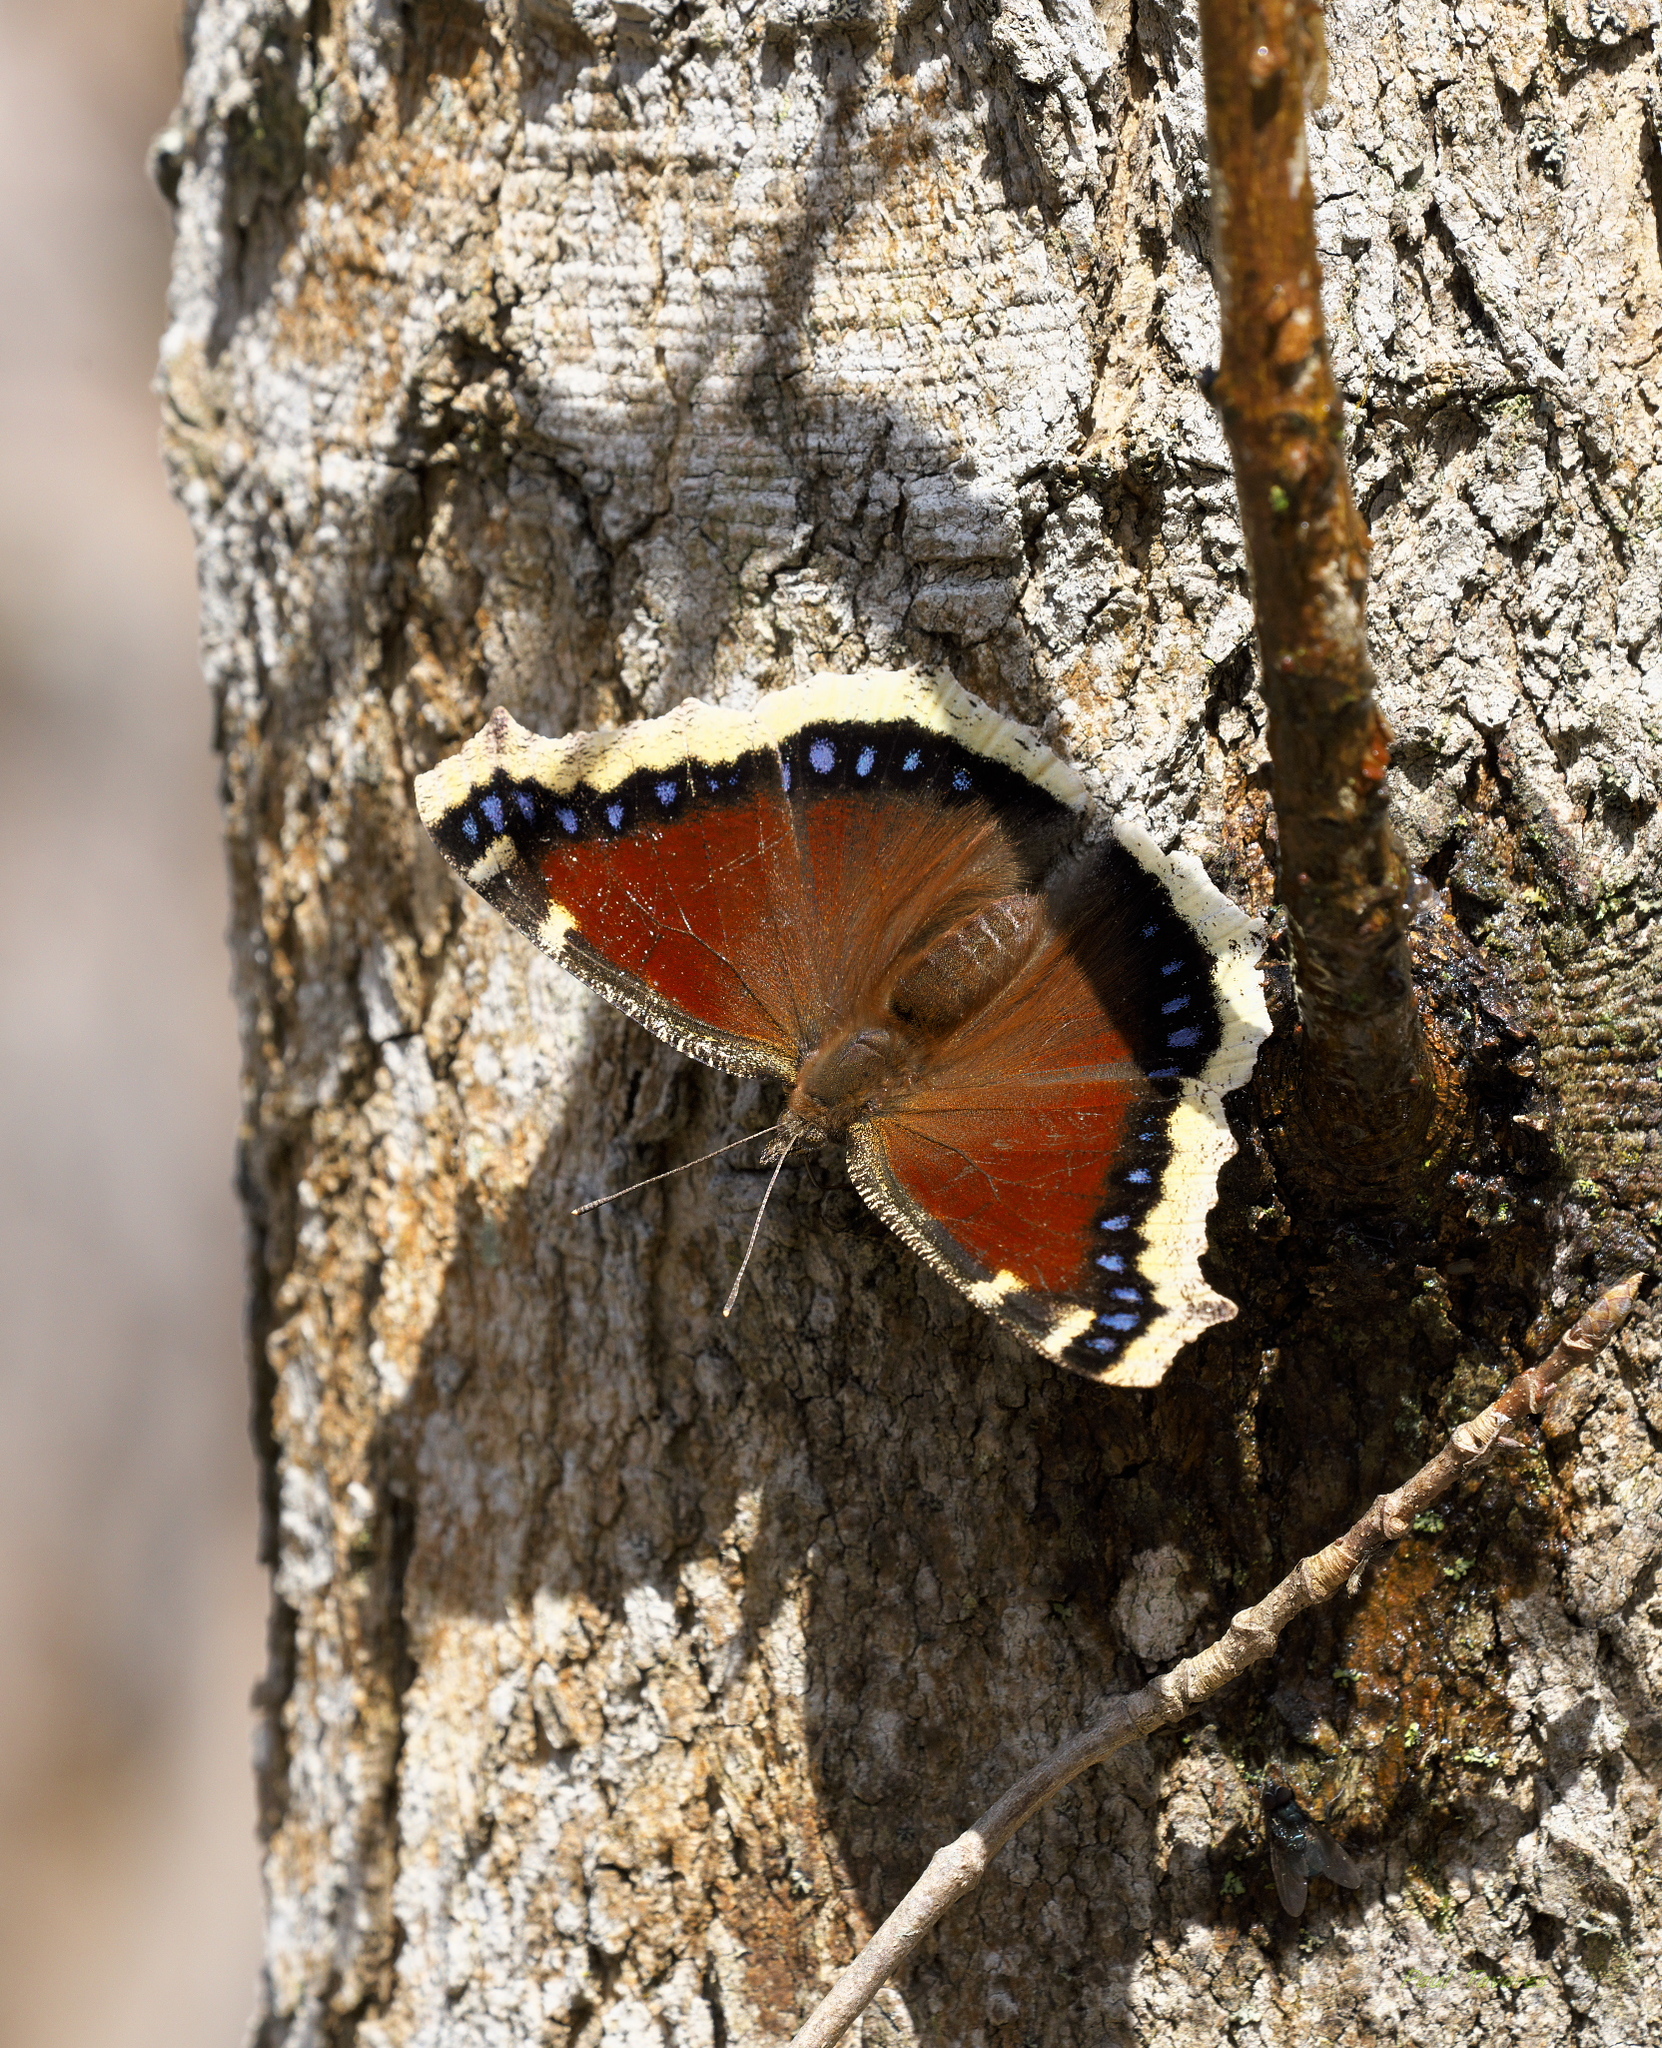 A mourning cloak butterfly with its wings open is perched on the trunk of a tree. The upper side of its wings are a warm brown with pale yellow edges and small blue spots.